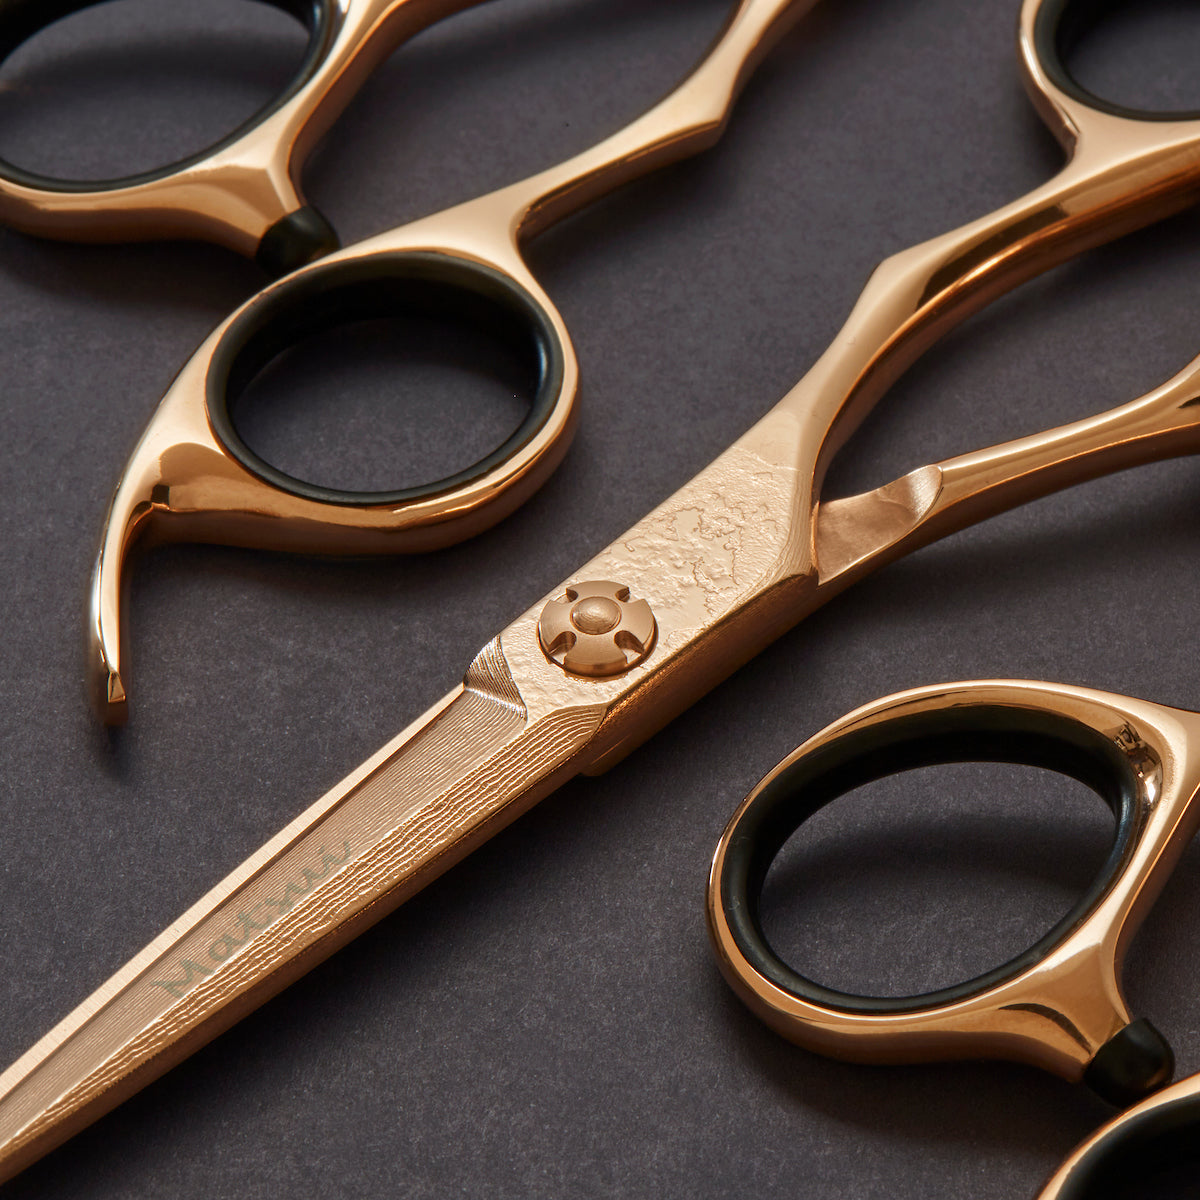 What is the difference between Japanese and German scissors